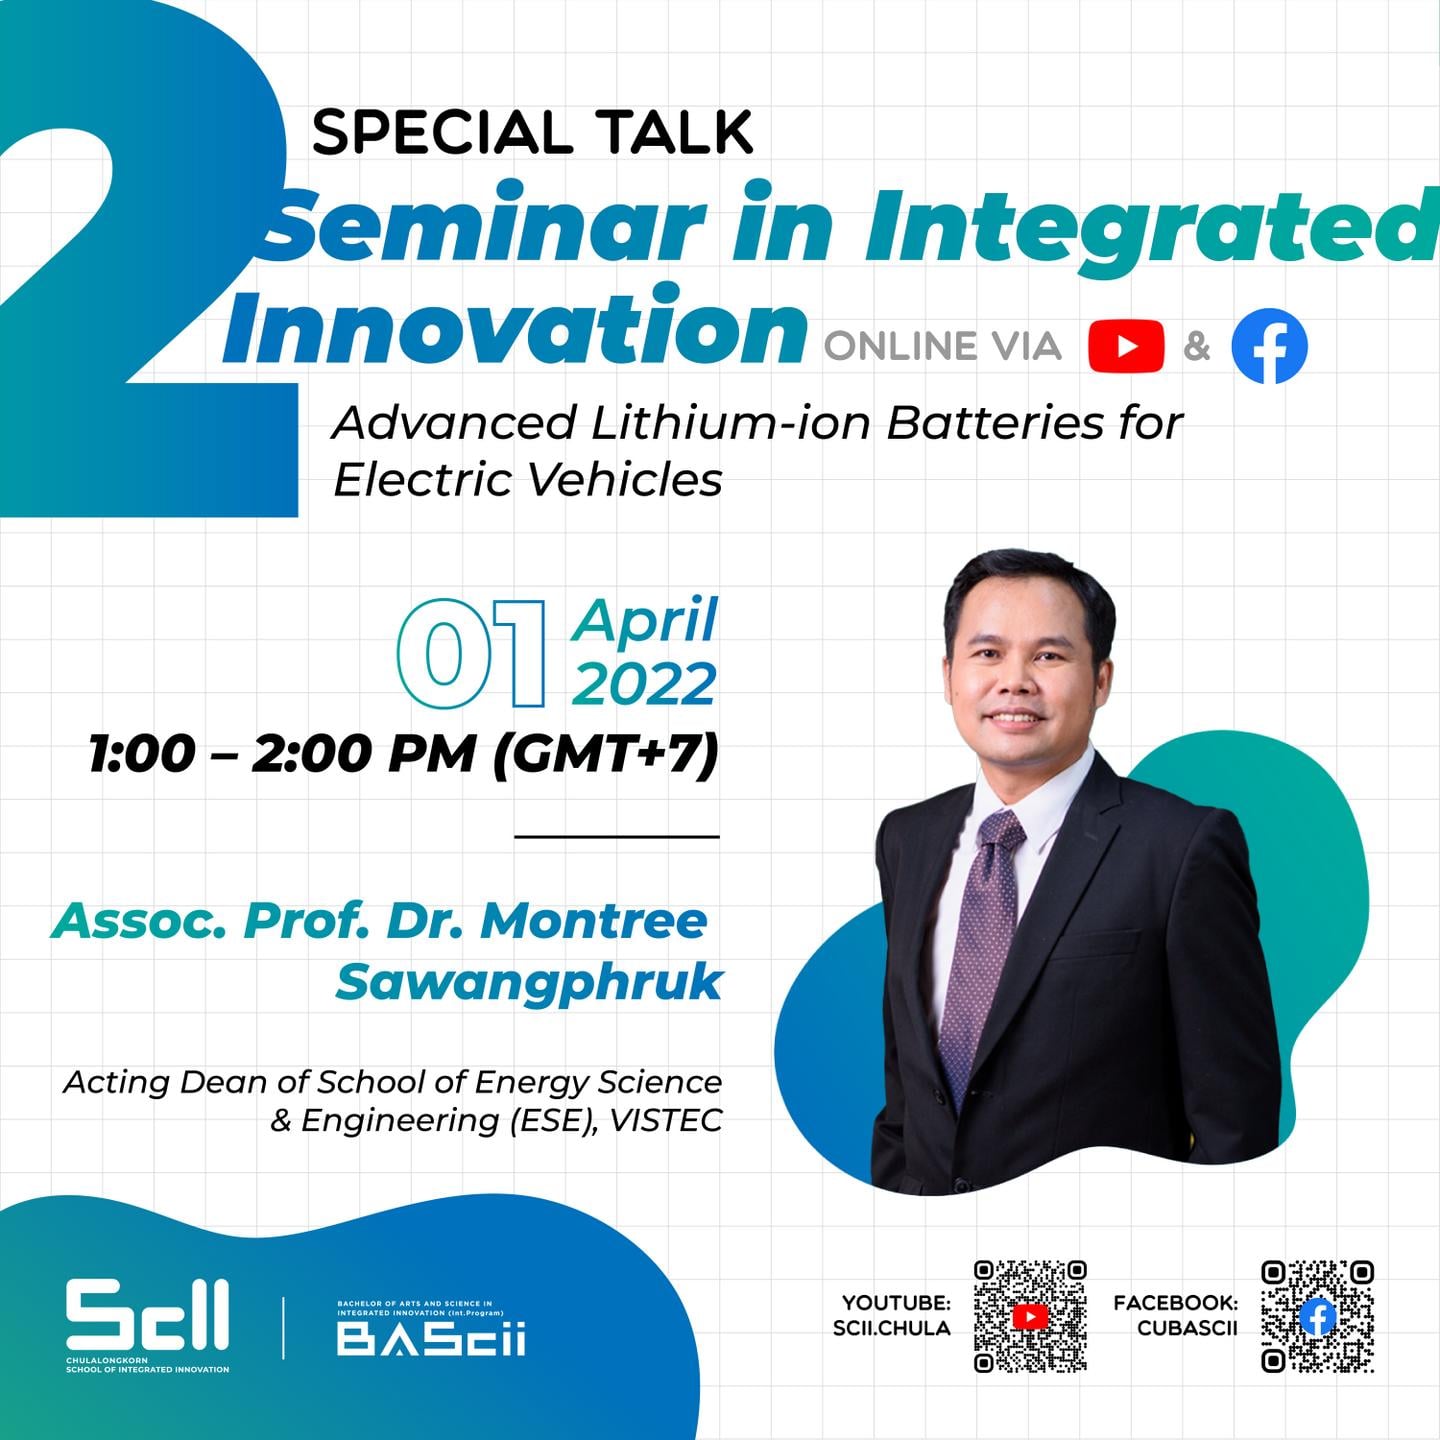 Seminar in Integrated Innovation Advanced Lithium-ion Batteries for Electric Vehicles 01 April 2022 (1:00 – 2:00 PM) Assoc. Prof. Dr Montree Sawangphruk (Acting Dean of School of Energy Science & Engineering (ESE), VISTEC)